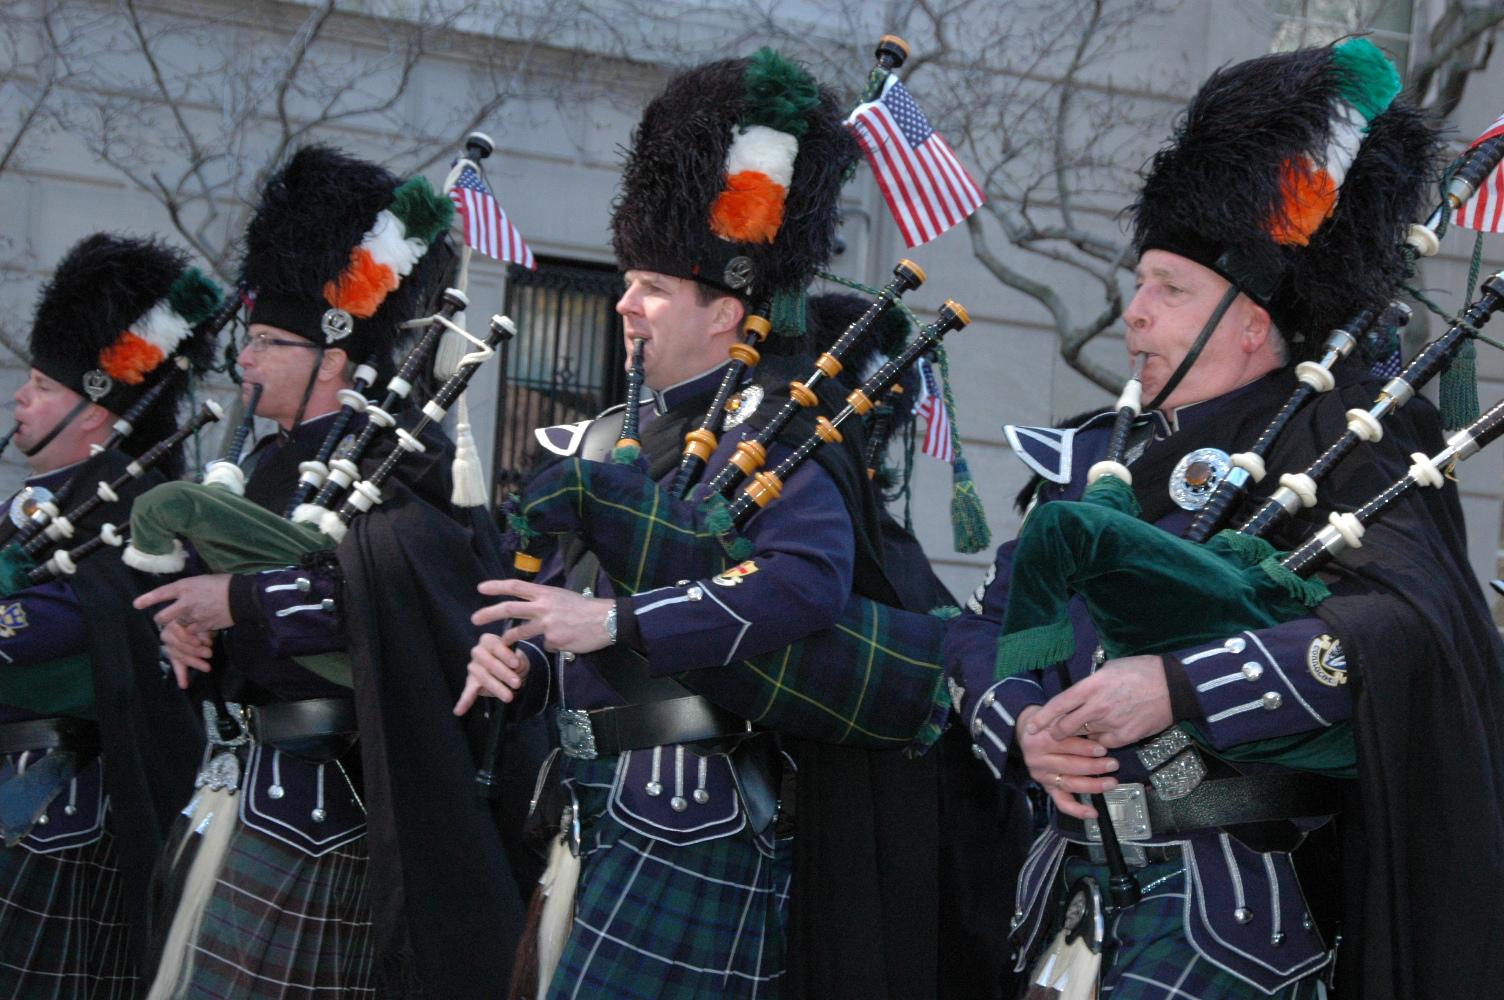 Some New York St. Patrick’s Day determined to go ahead